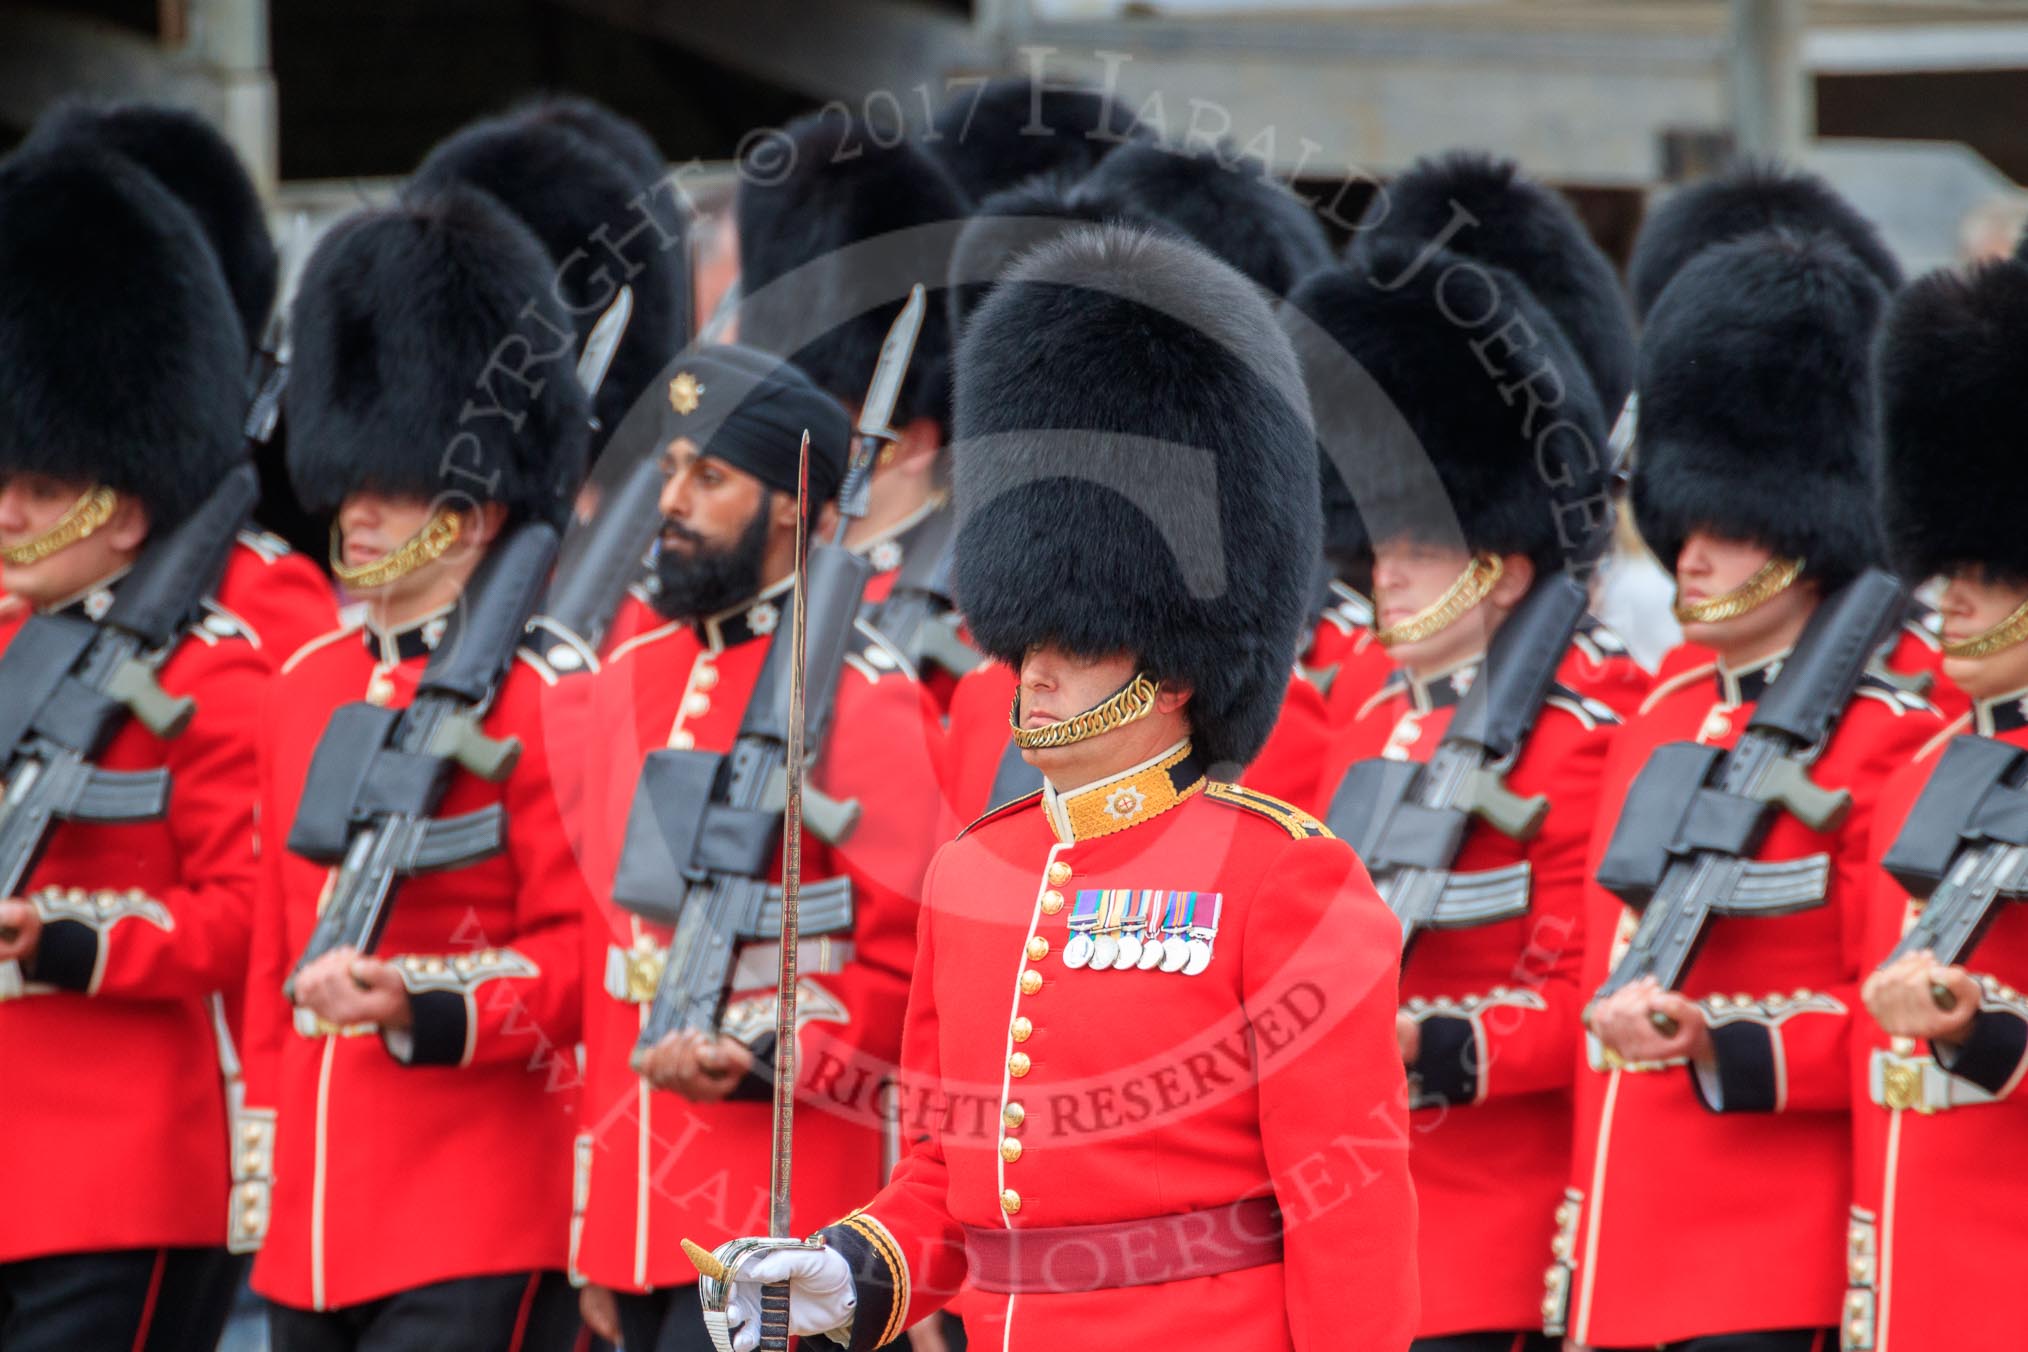 during The Colonel's Review {iptcyear4} (final rehearsal for Trooping the Colour, The Queen's Birthday Parade)  at Horse Guards Parade, Westminster, London, 2 June 2018, 11:35.